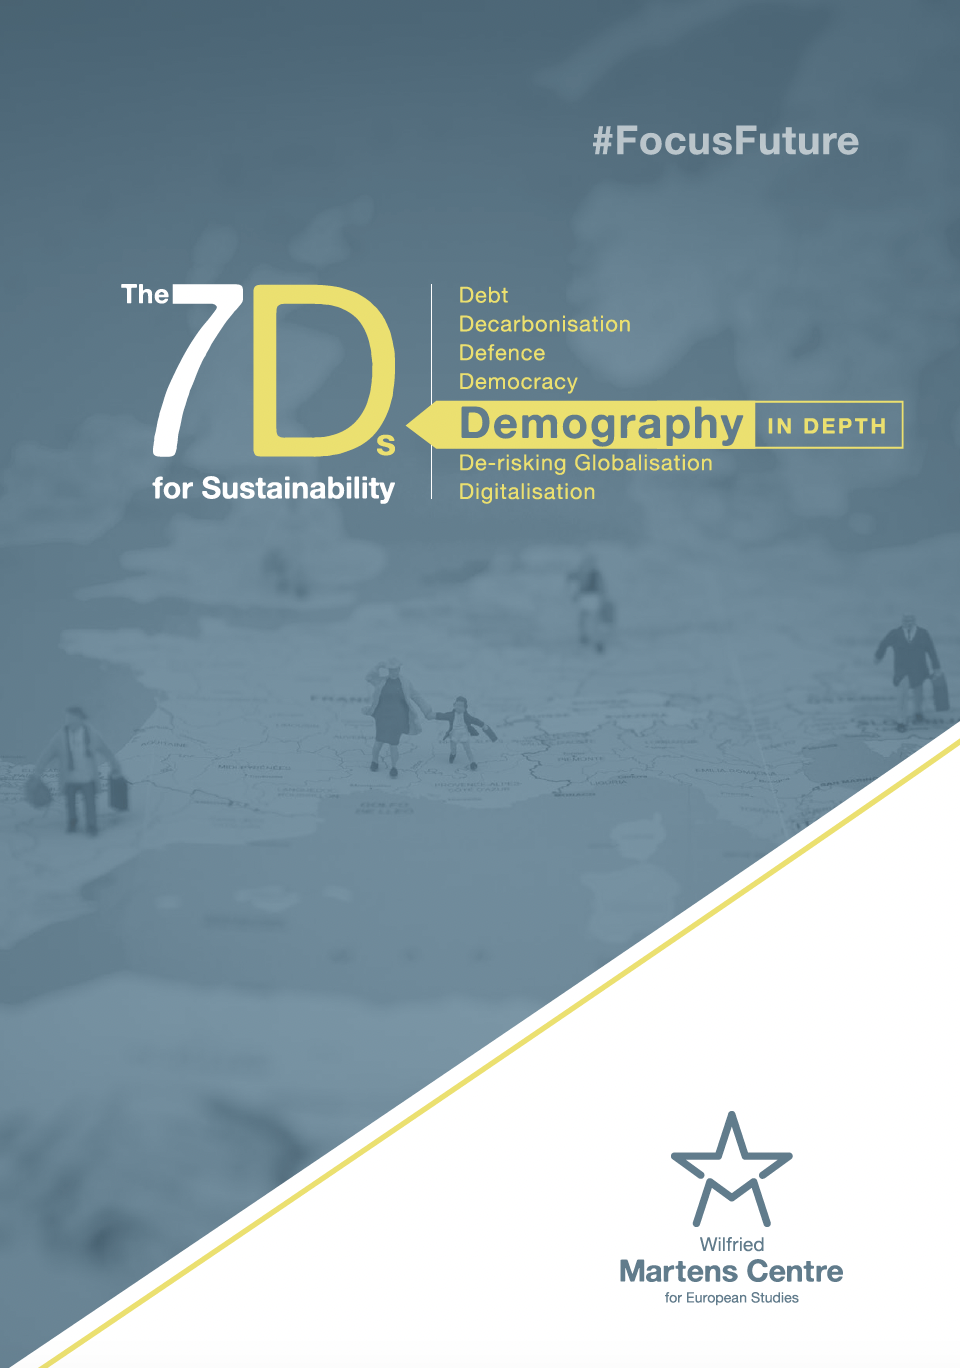 The 7Ds - Demography in Depth